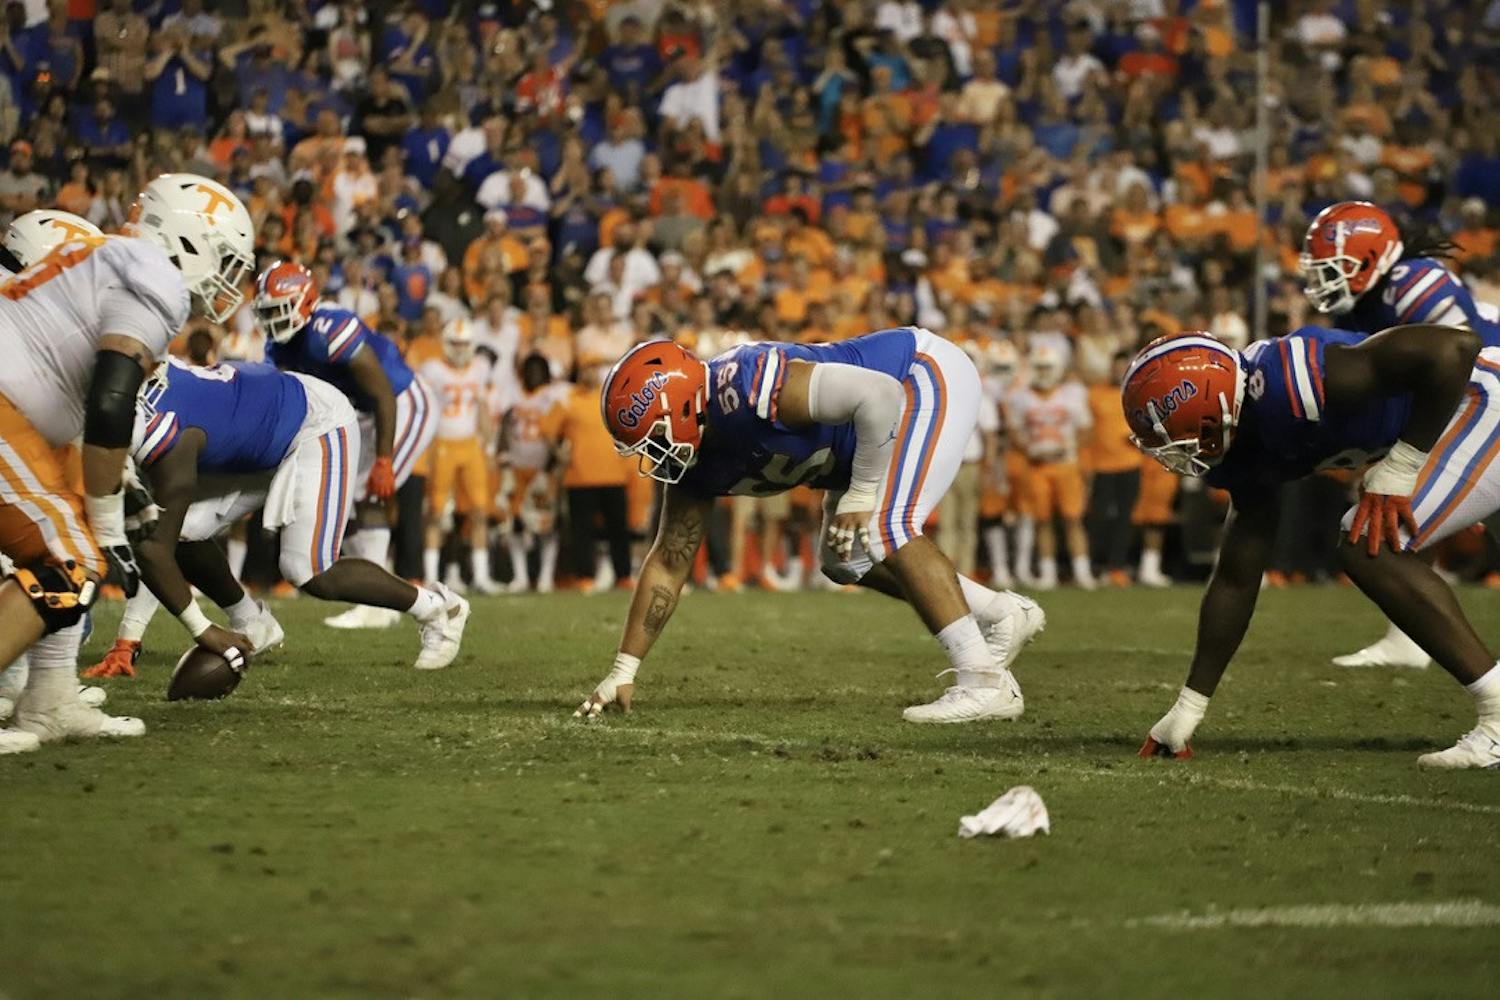 Florida&#x27;s Antonio Valentino sets up for a play against Tennessee on Sept. 25, 2021. He signed as an undrafted free agent with the New York Giants.